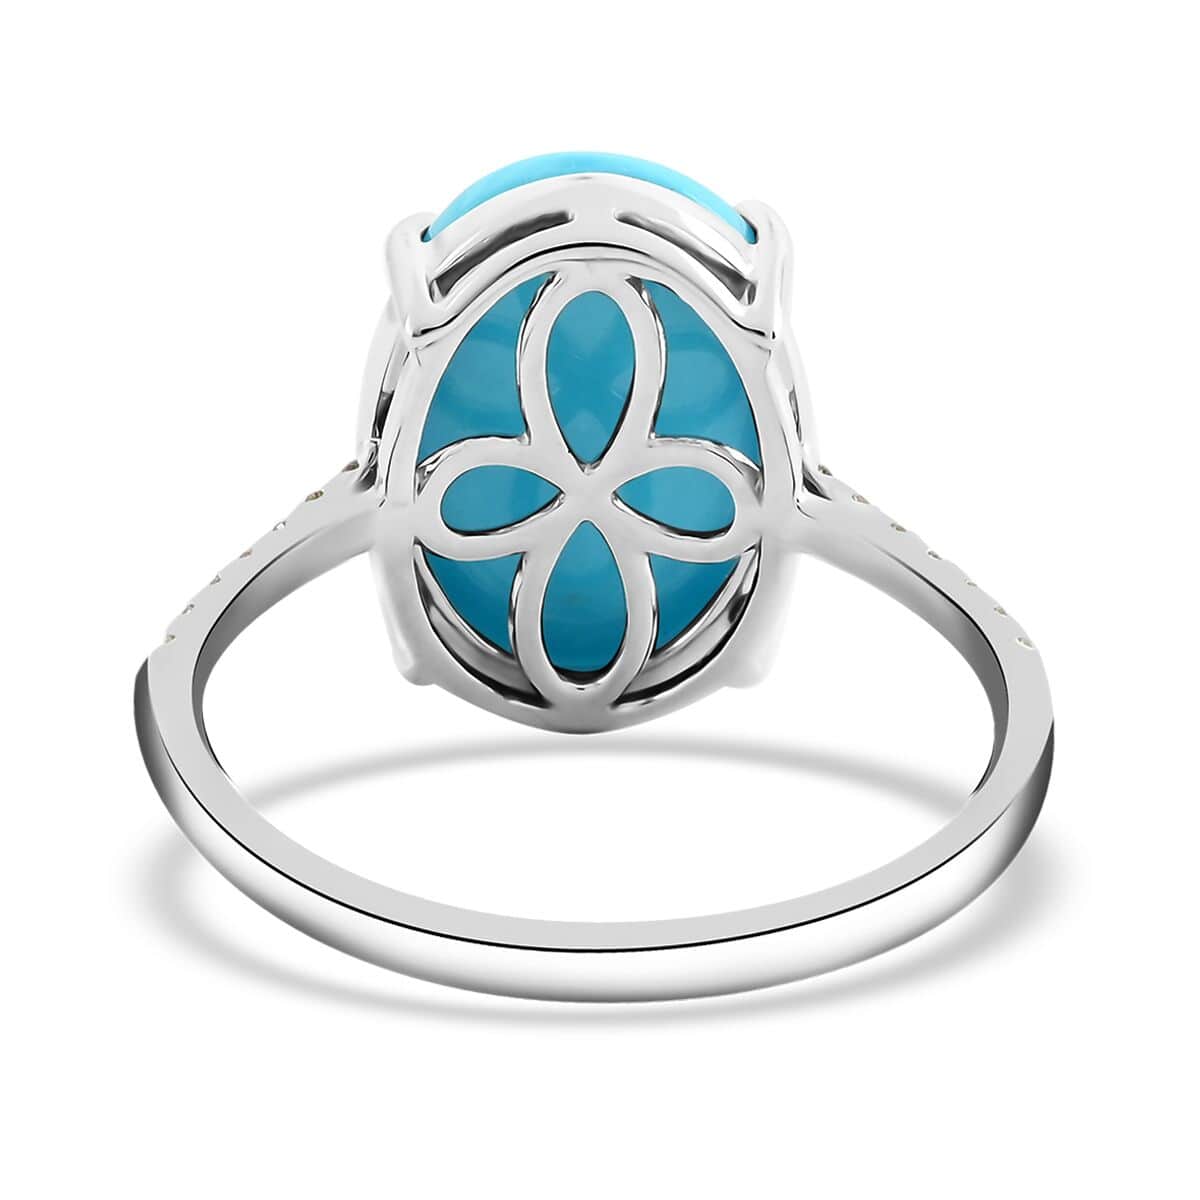 Luxoro 14K White Gold AAA Sleeping Beauty Turquoise and G-H I2 Diamond Ring (Size 6.0) 2.25 Grams 5.35 ctw (Del. 15-20 Days)  image number 4